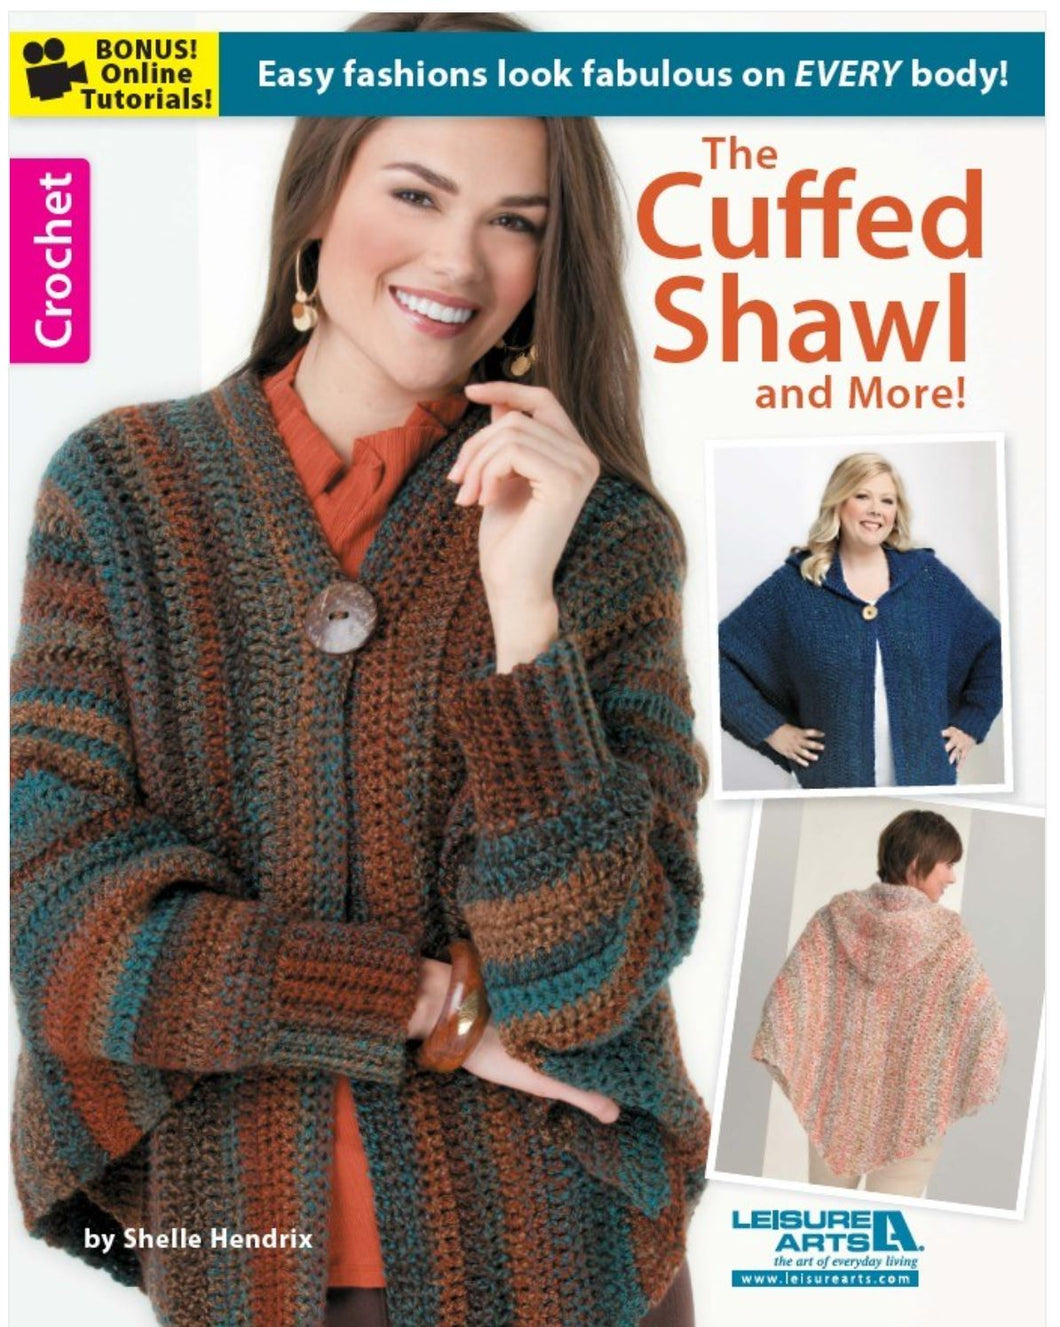 The Cuffed Shawl and More!